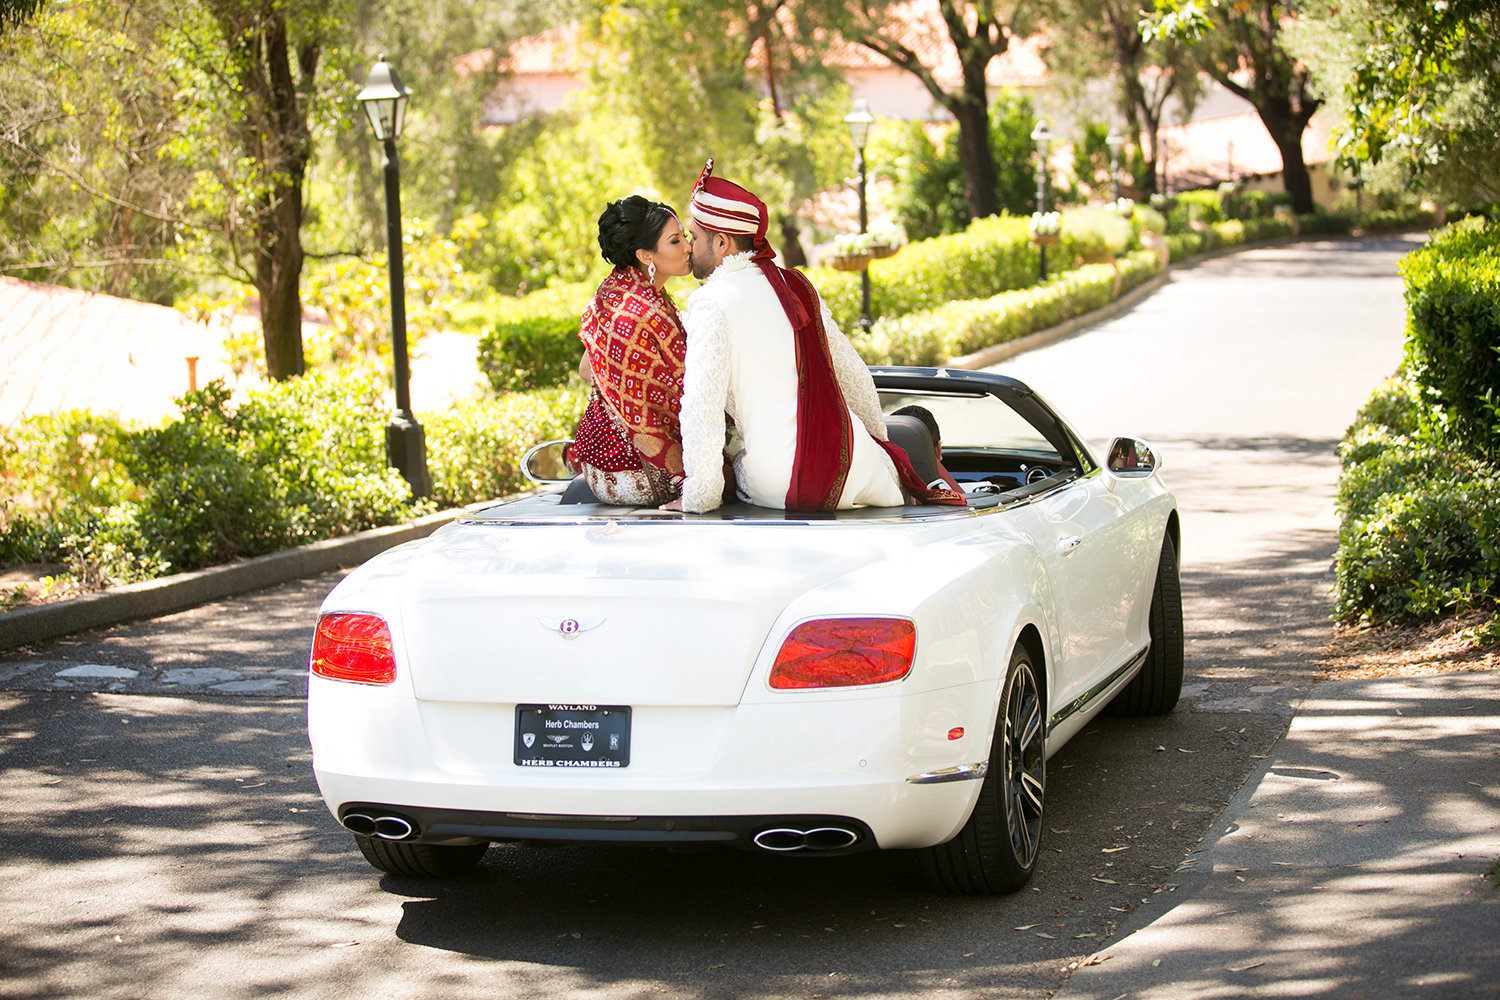 Indian bride and groom make their grand exit in a Bentley